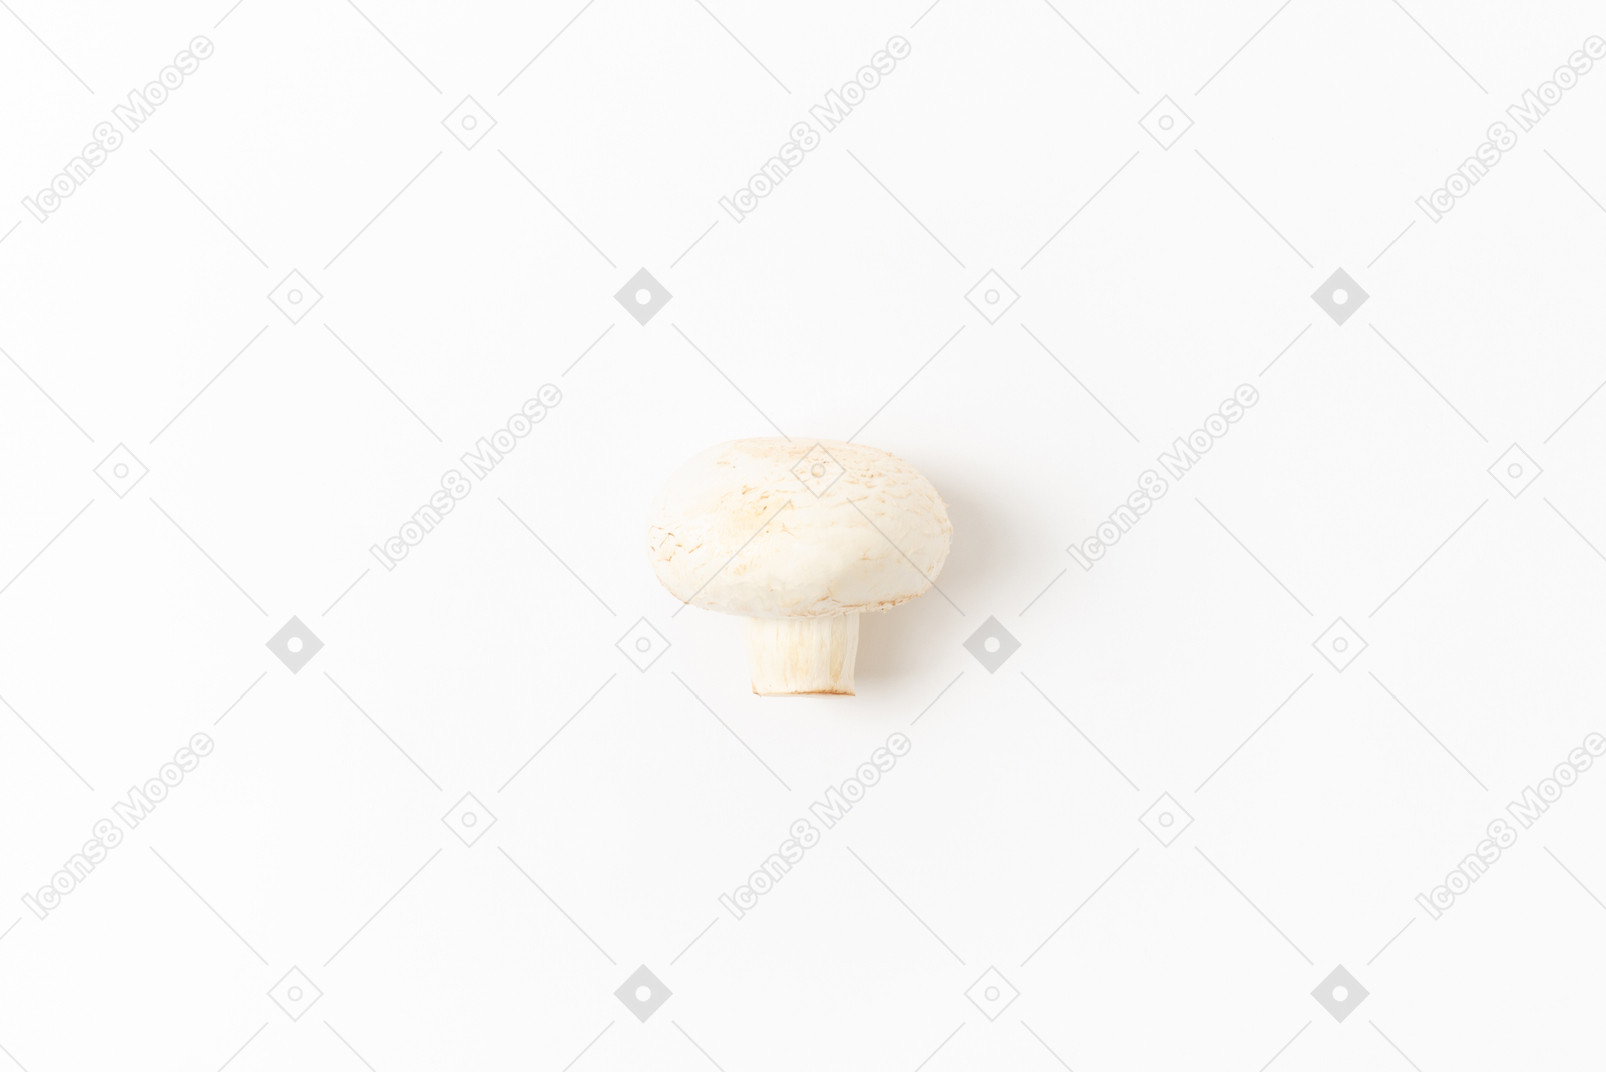 Any ideas about mushrooms recipe?